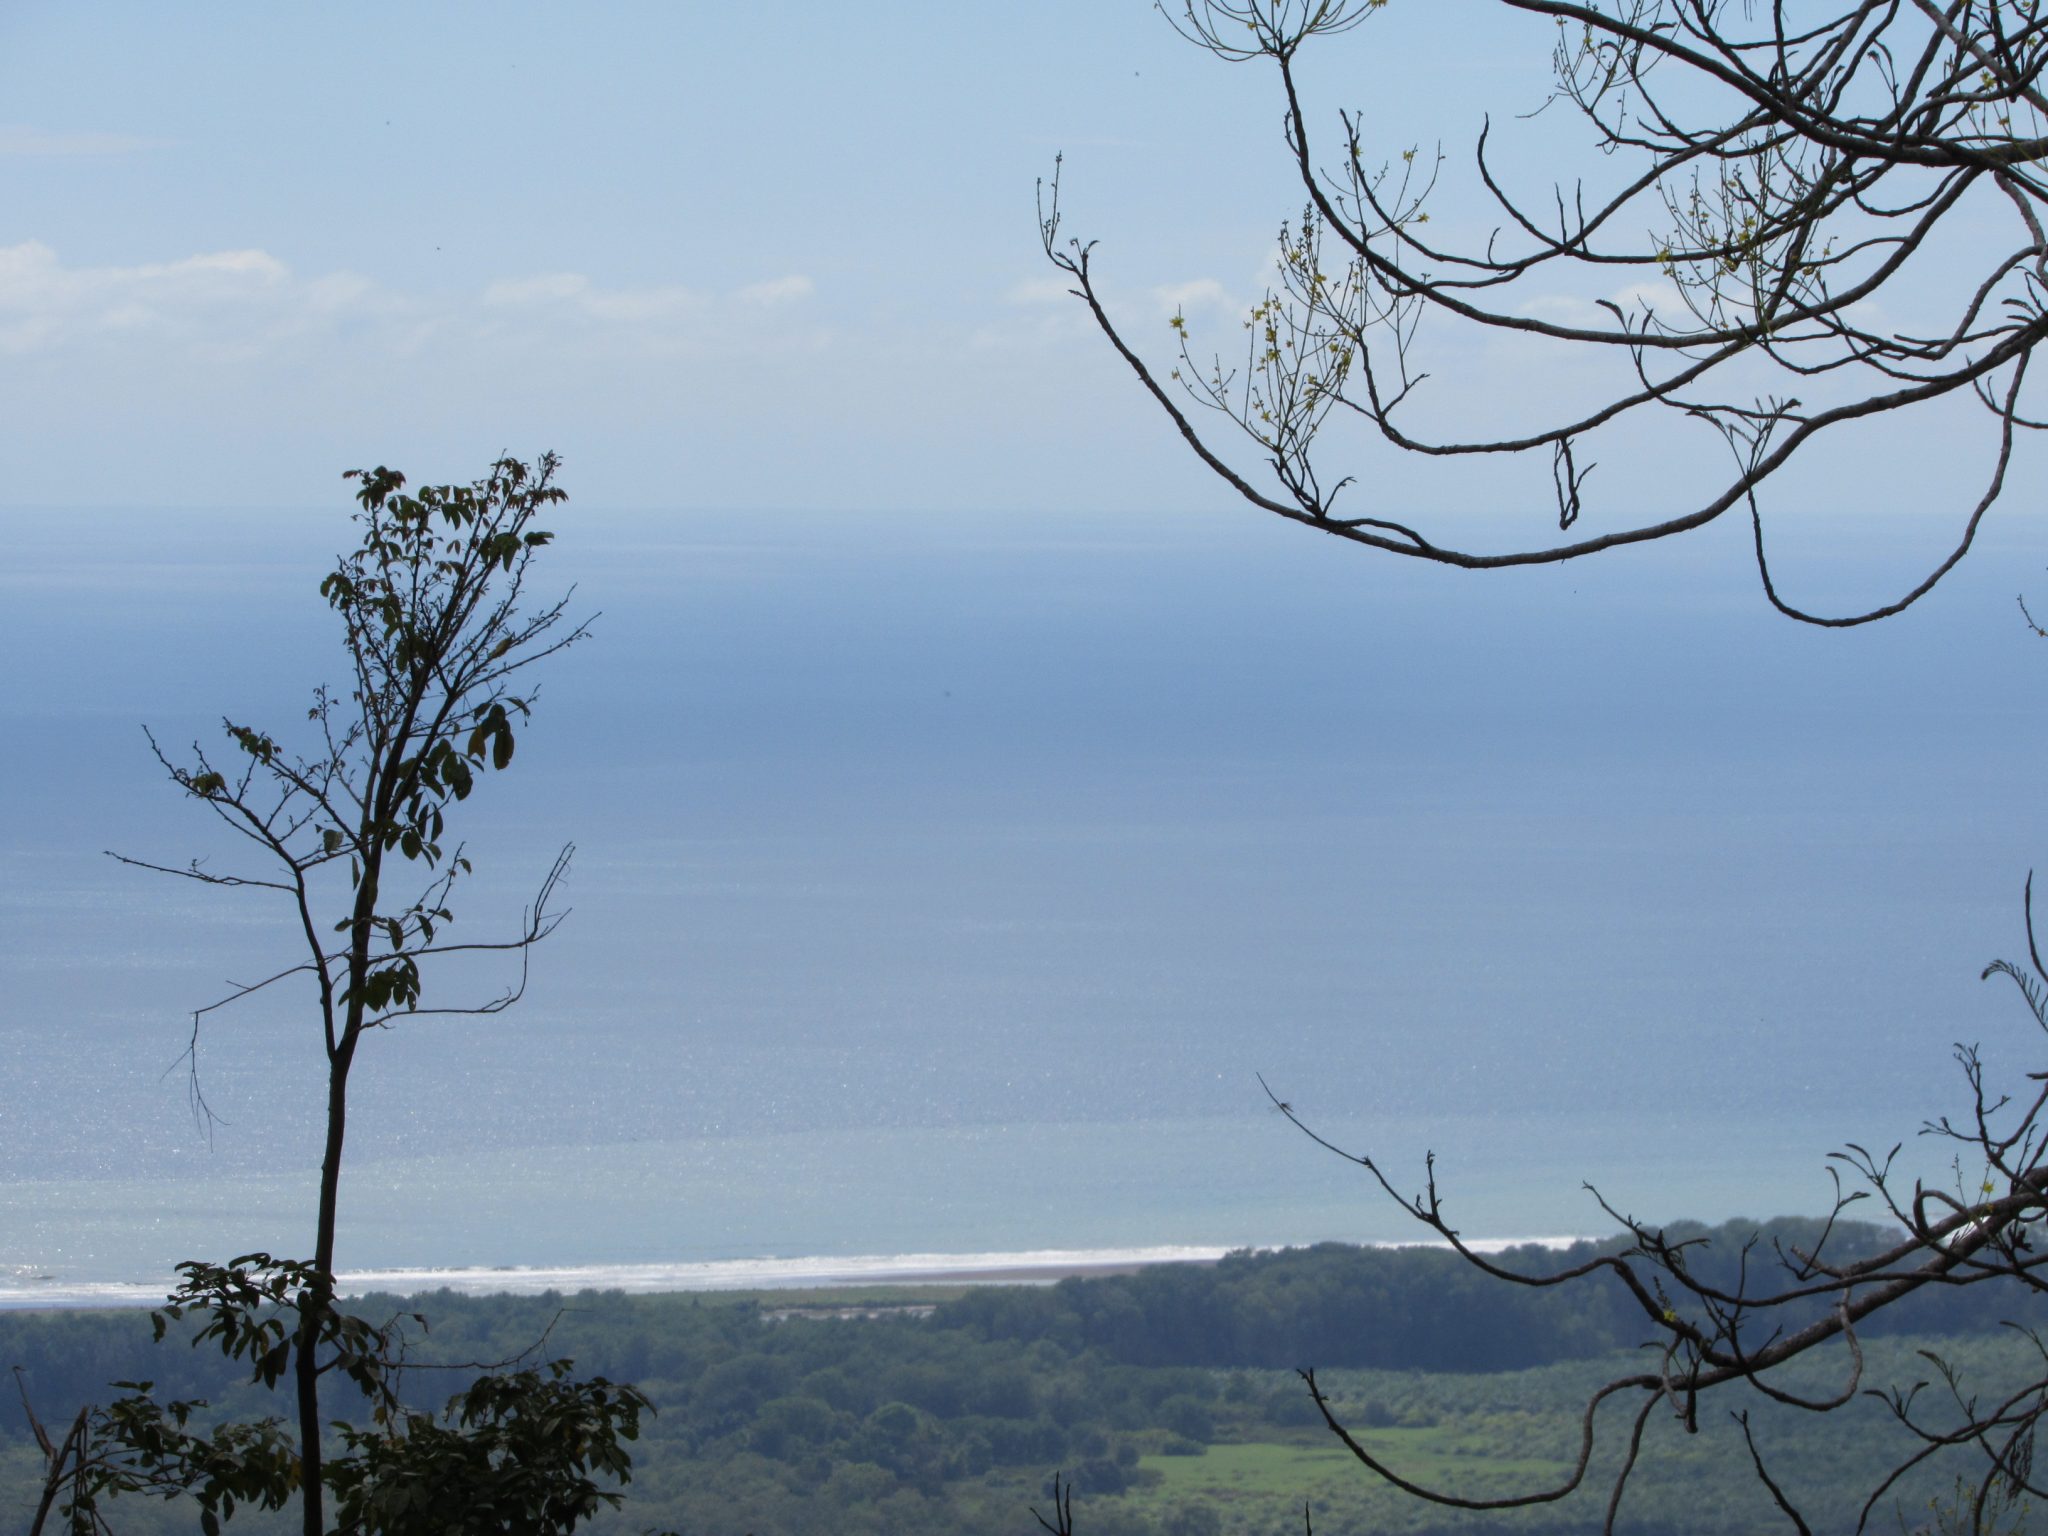 3.17 ACRES - Amazing Sunset Ocean View Property, Very Flat And Usable, No Restrictions!!!